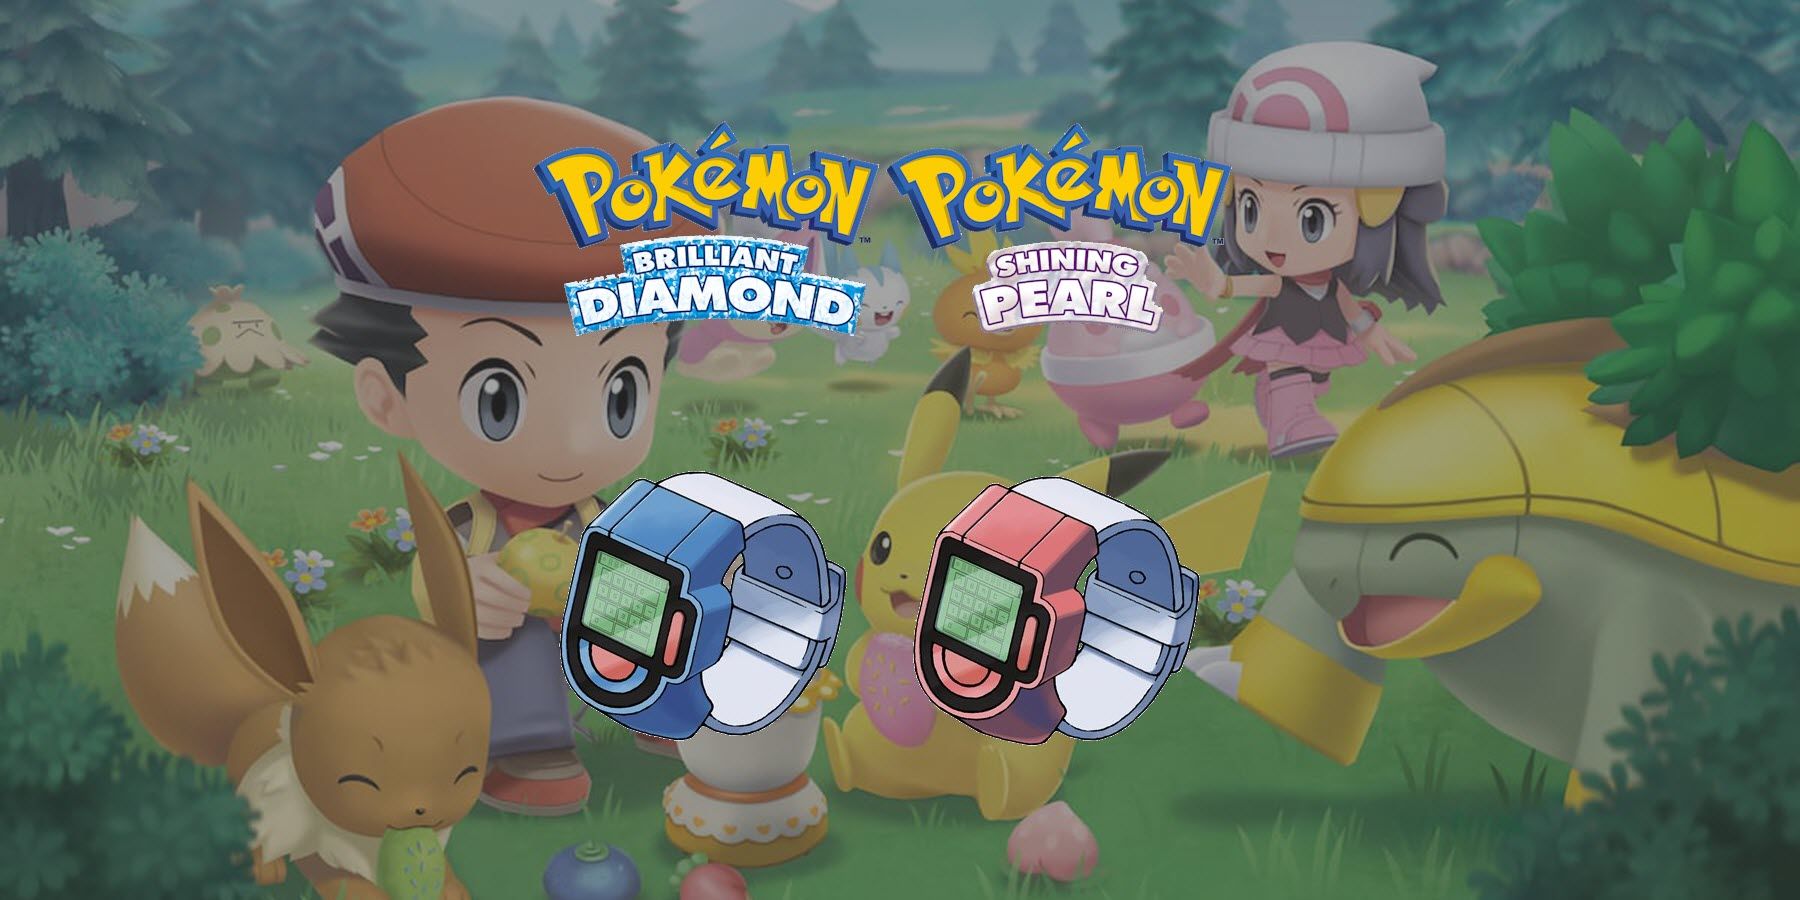 About: Cheats for Pokemon Diamond/Pearl Guide - FREE (iOS App